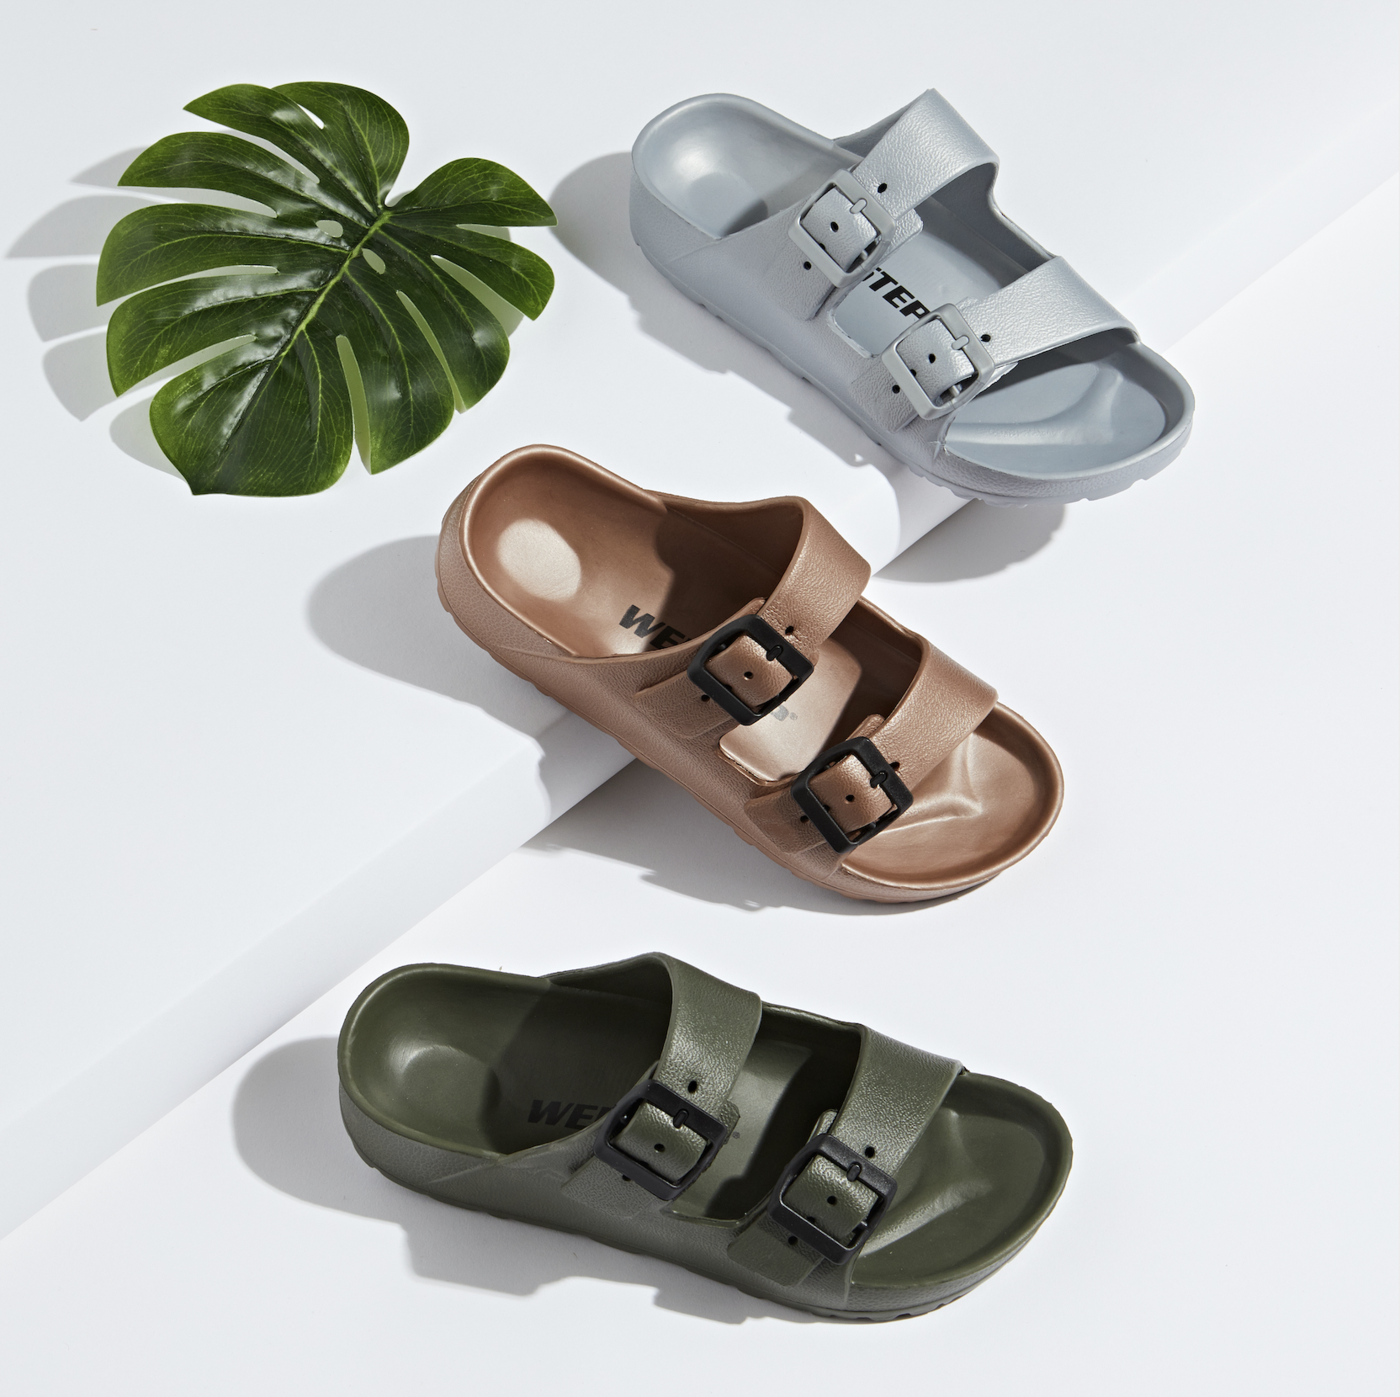 Unisex Sandals for Adults